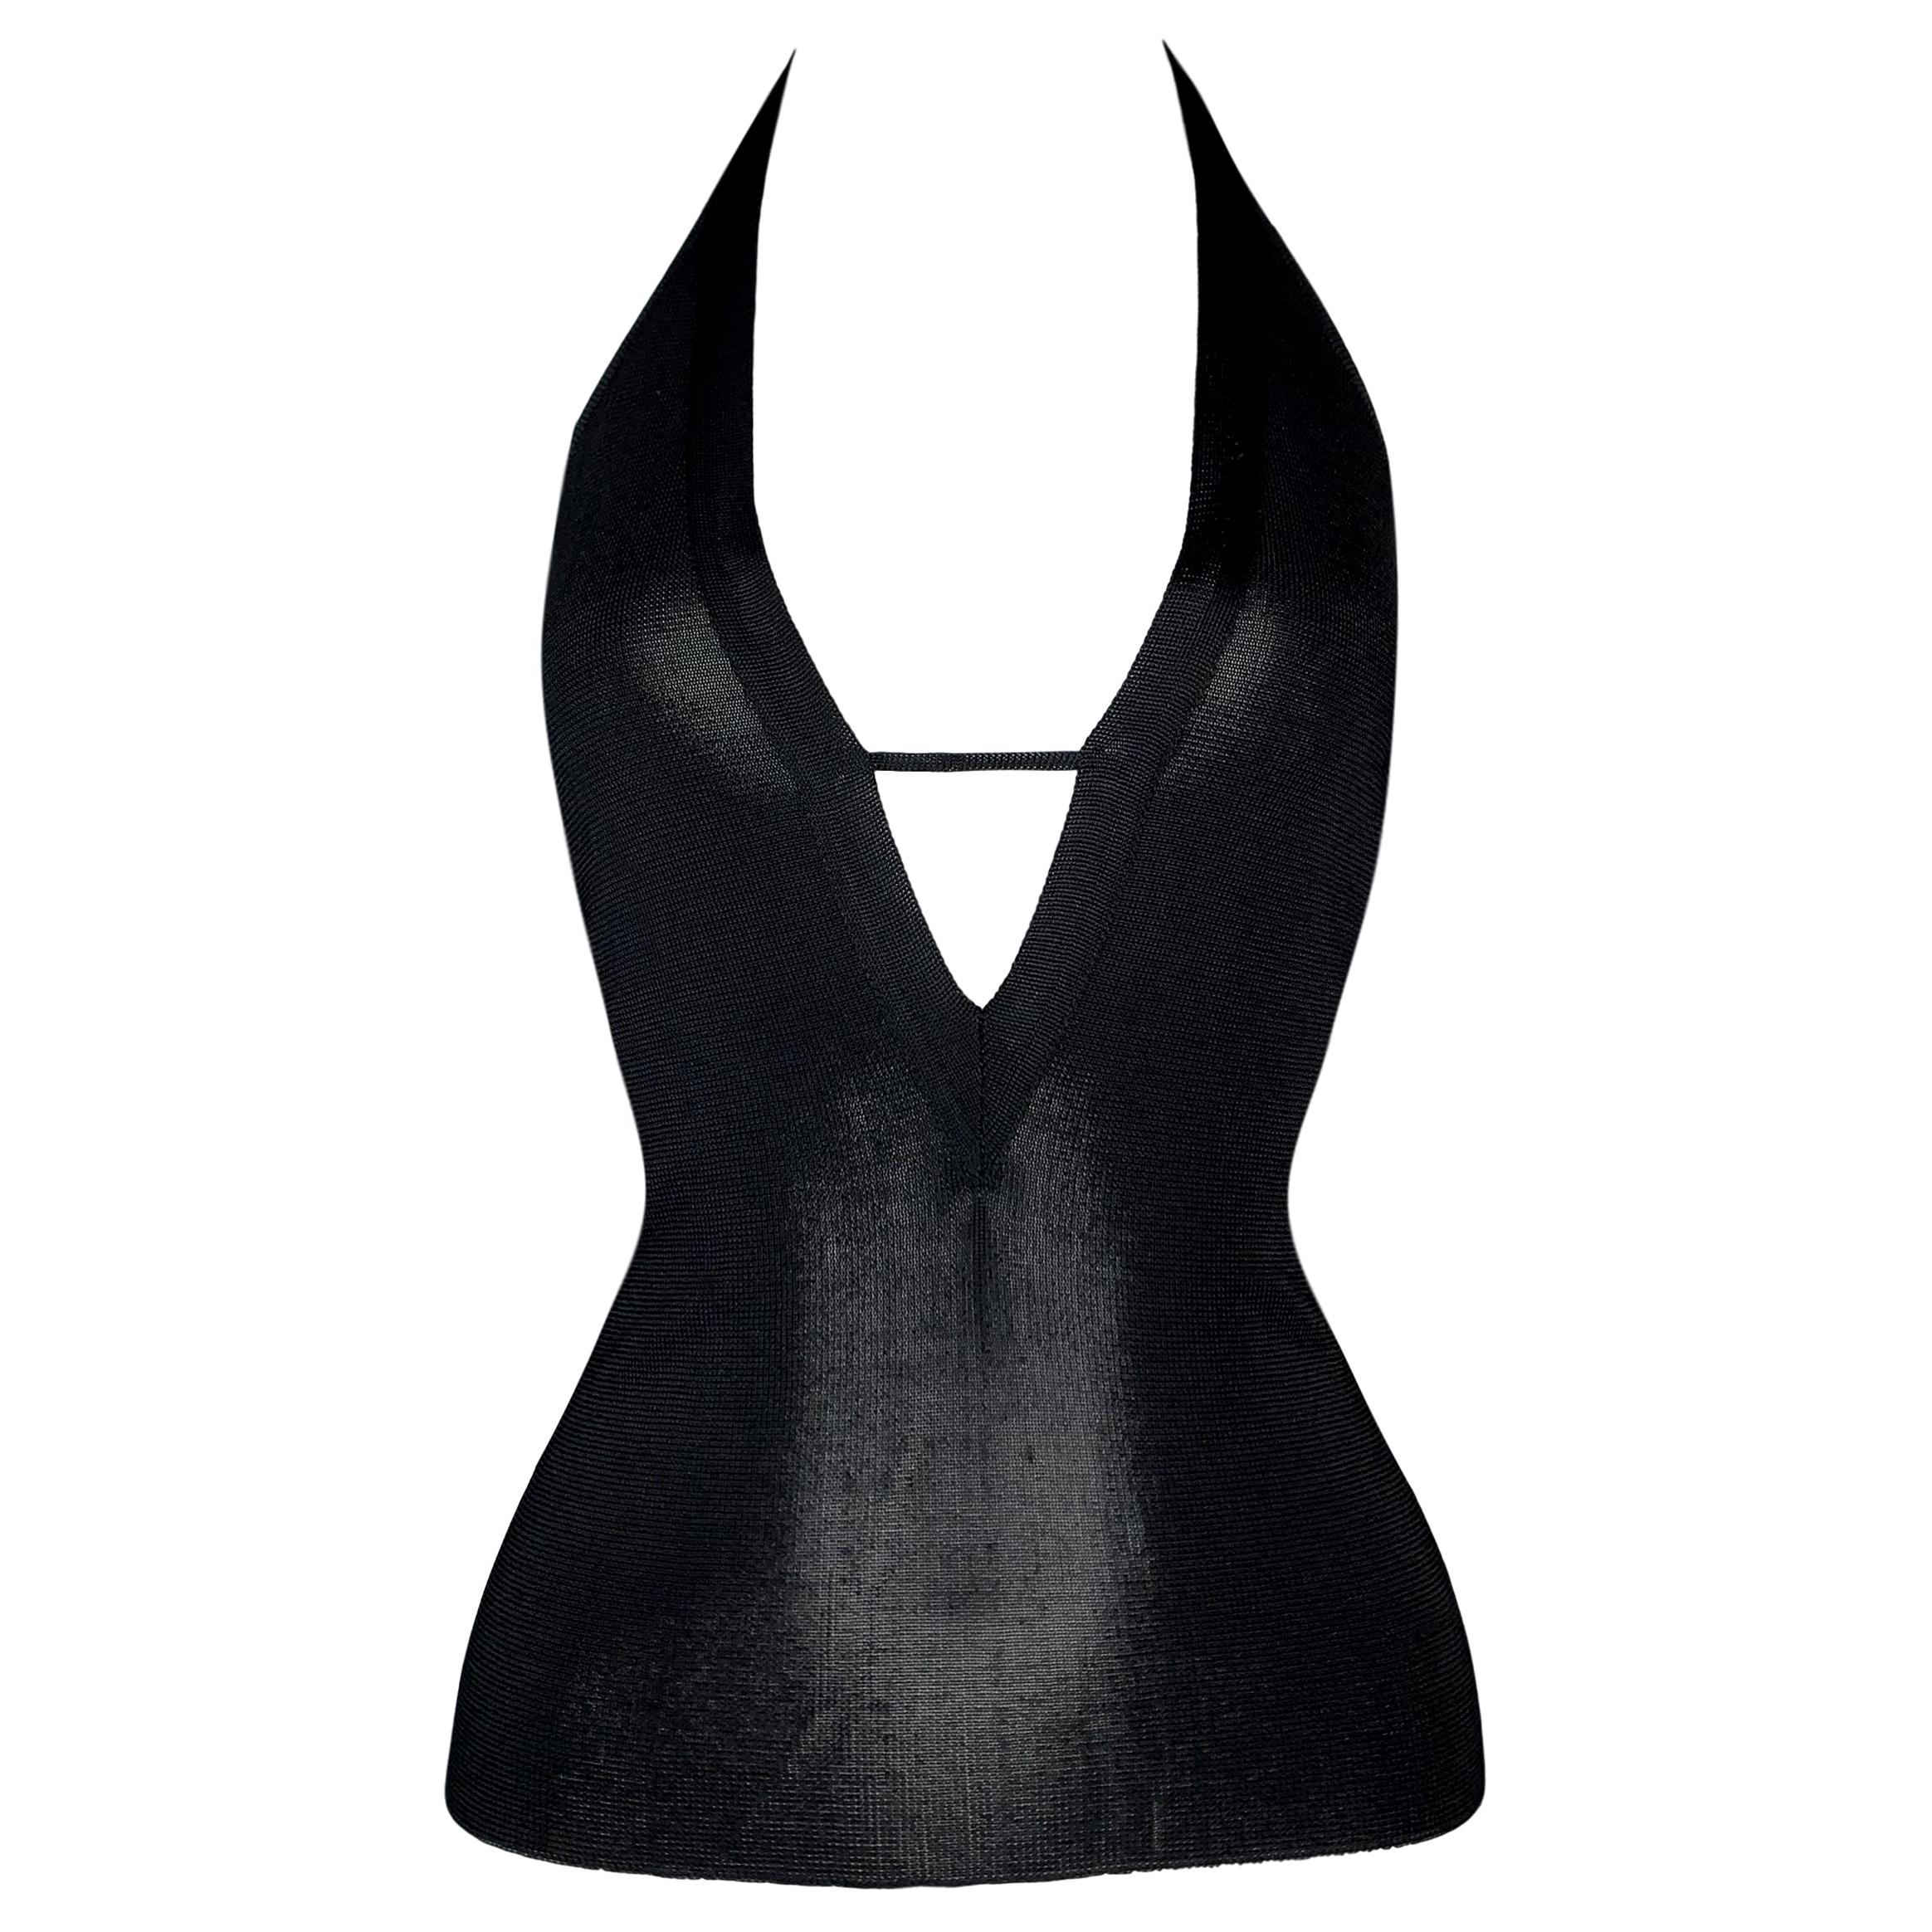 S/S 1998 Gucci by Tom Ford Semi-Sheer Plunging Black Halter Top at 1stDibs